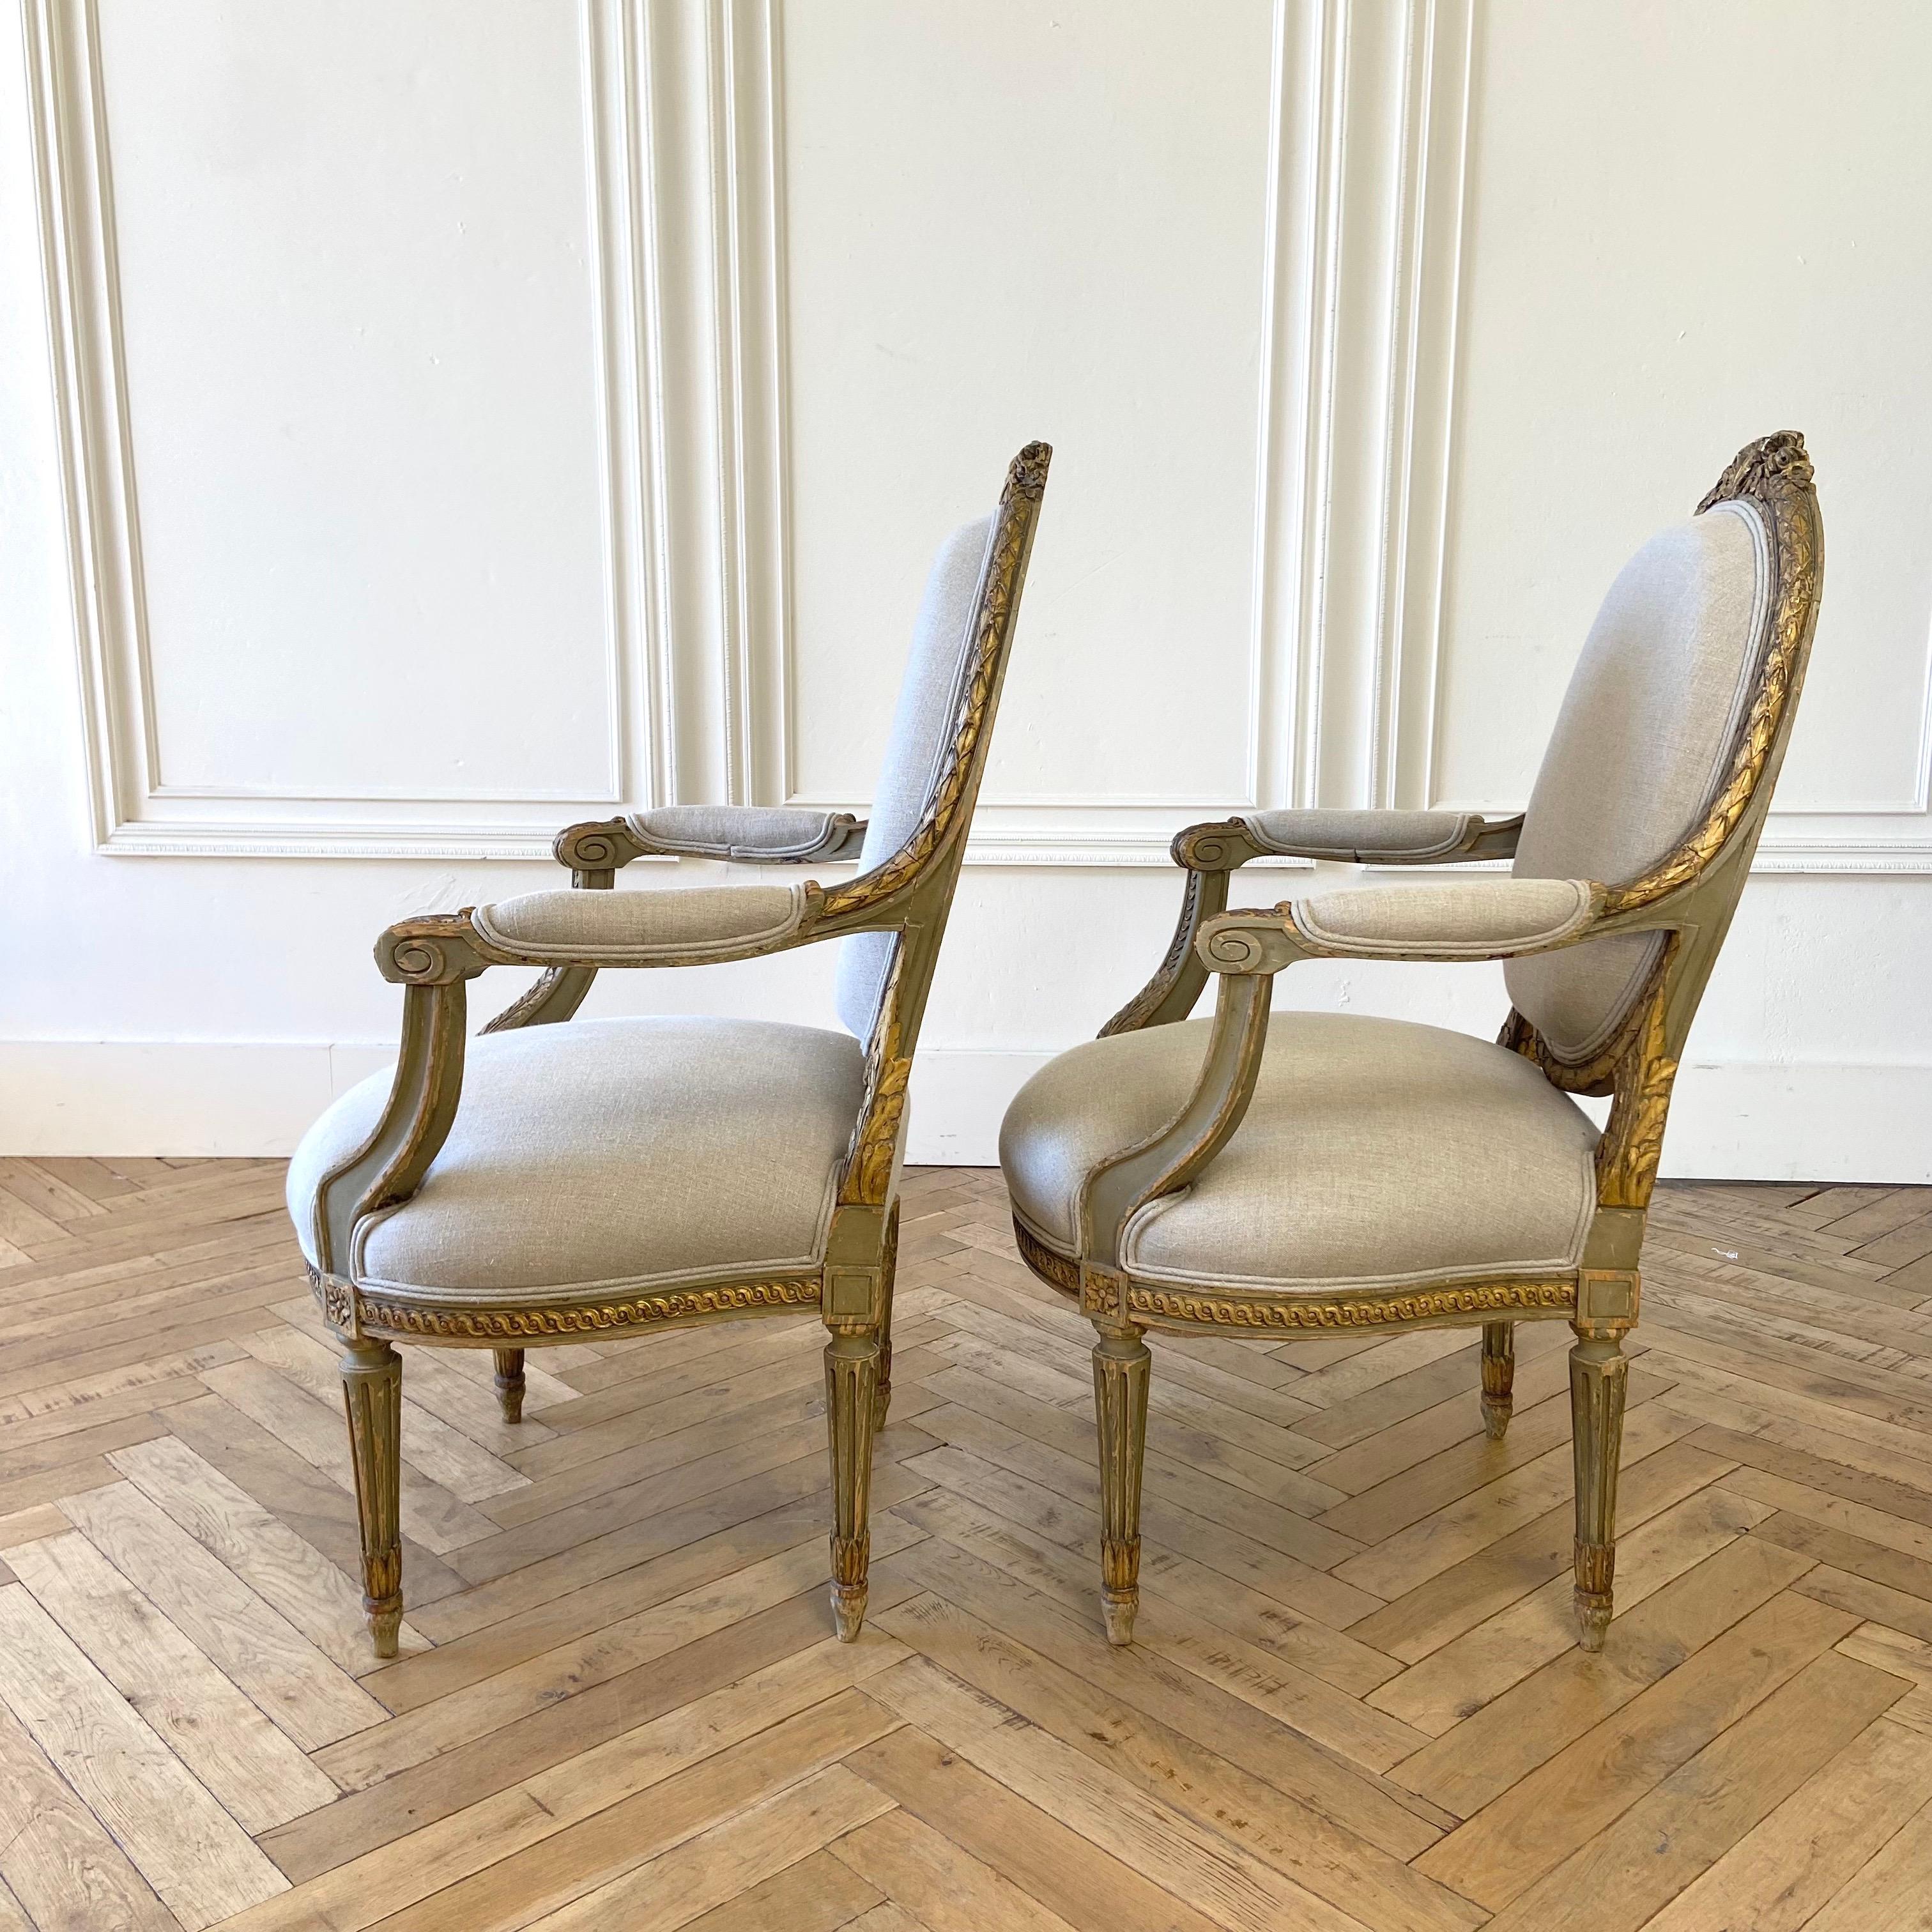 19th Century Antique Pair of French Louis XVI Style Arm Chairs Original Paint and Giltwood For Sale